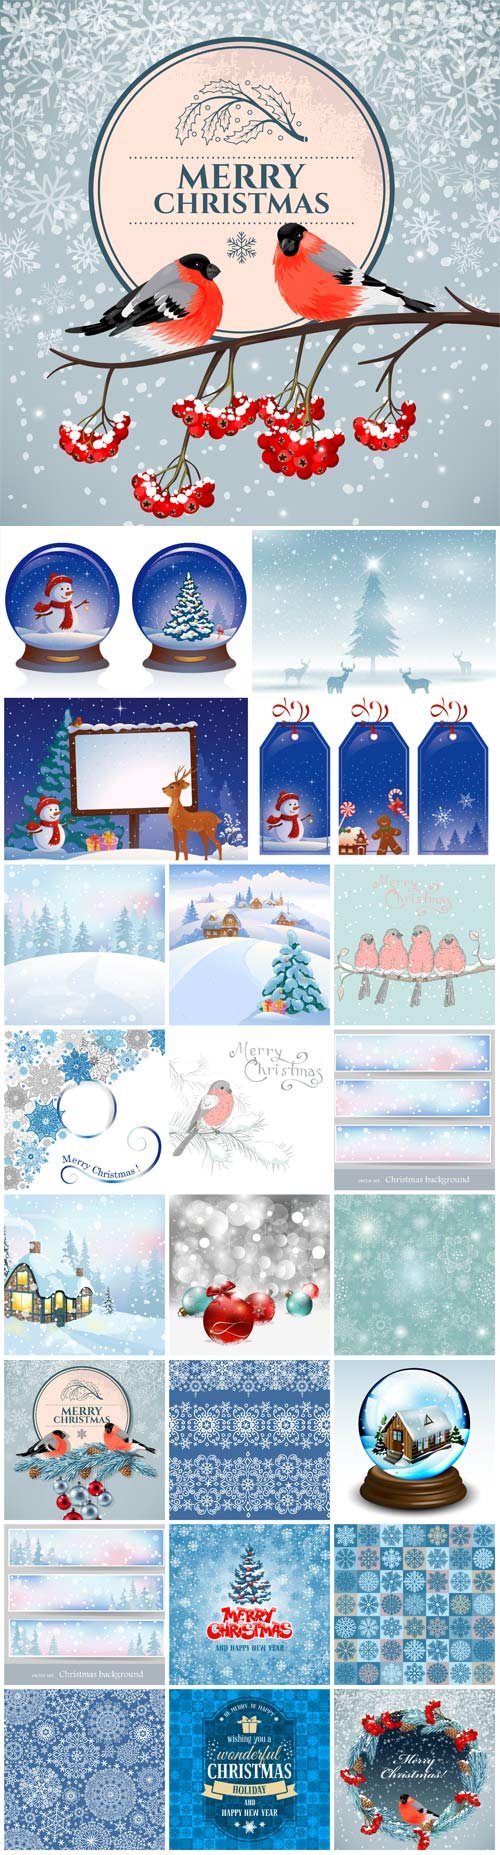 New Year and Christmas illustrations in vector №10